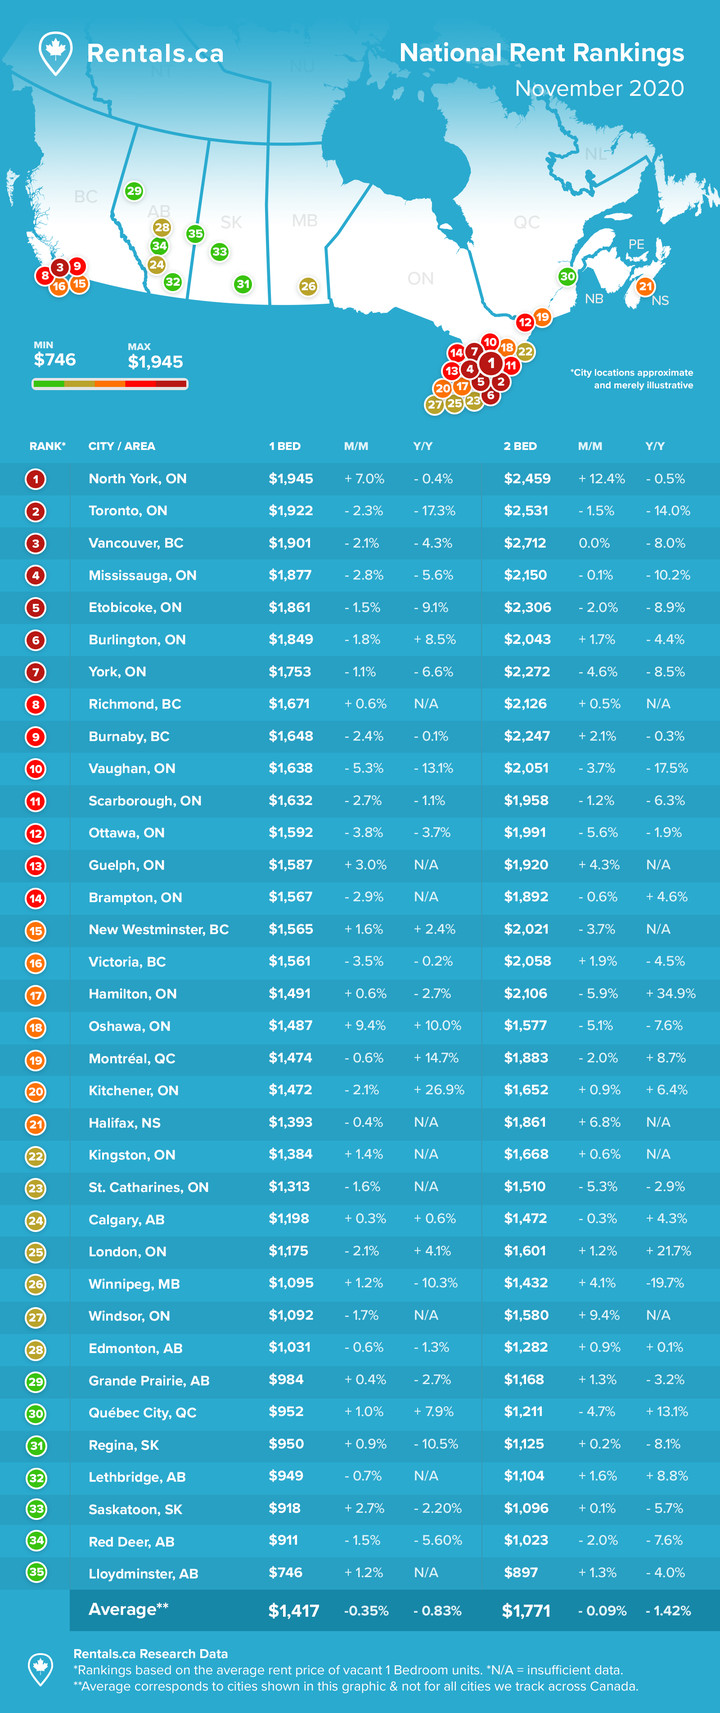 Montreal is still one of the cheaper places to be a renter.